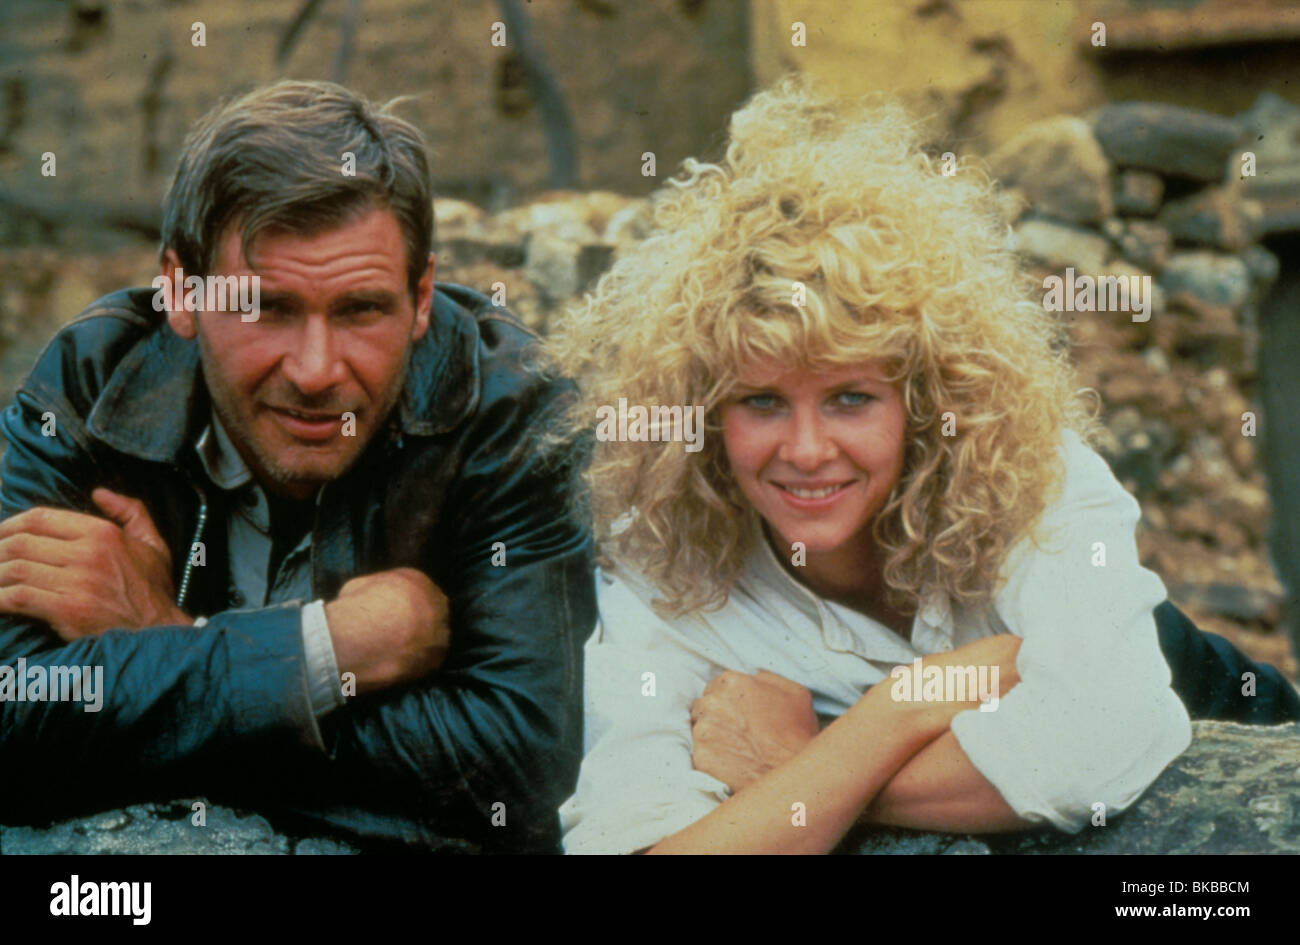 INDIANA JONES AND THE TEMPLE OF DOOM (1984) HARRISON FORD, KATE CAPSHAW INT 039 Stock Photo